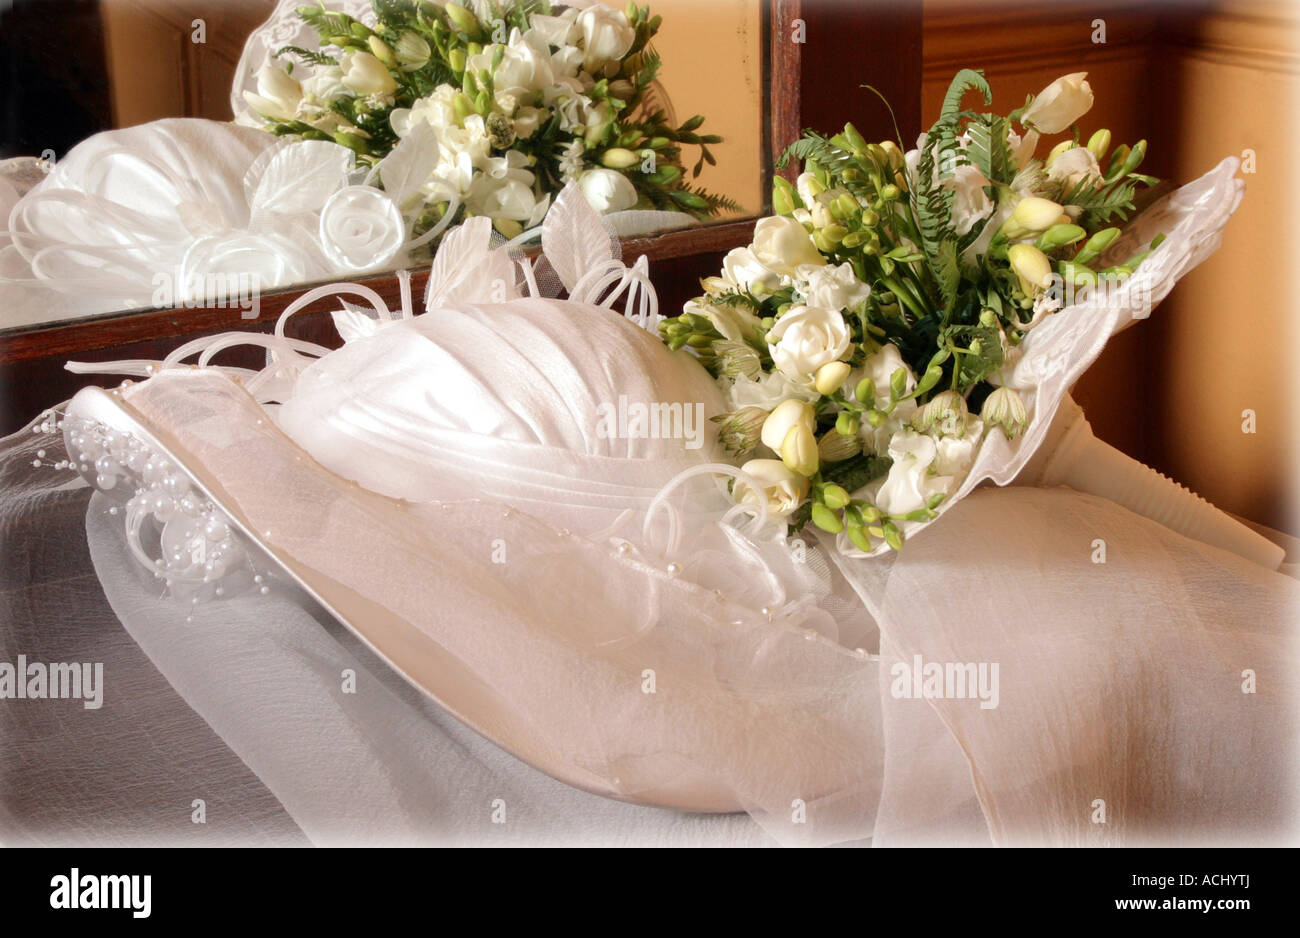 A portrait of a white traditional wedding dress pictured here in a presentation box with a bouquet of flowers on top of it. Stock Photo